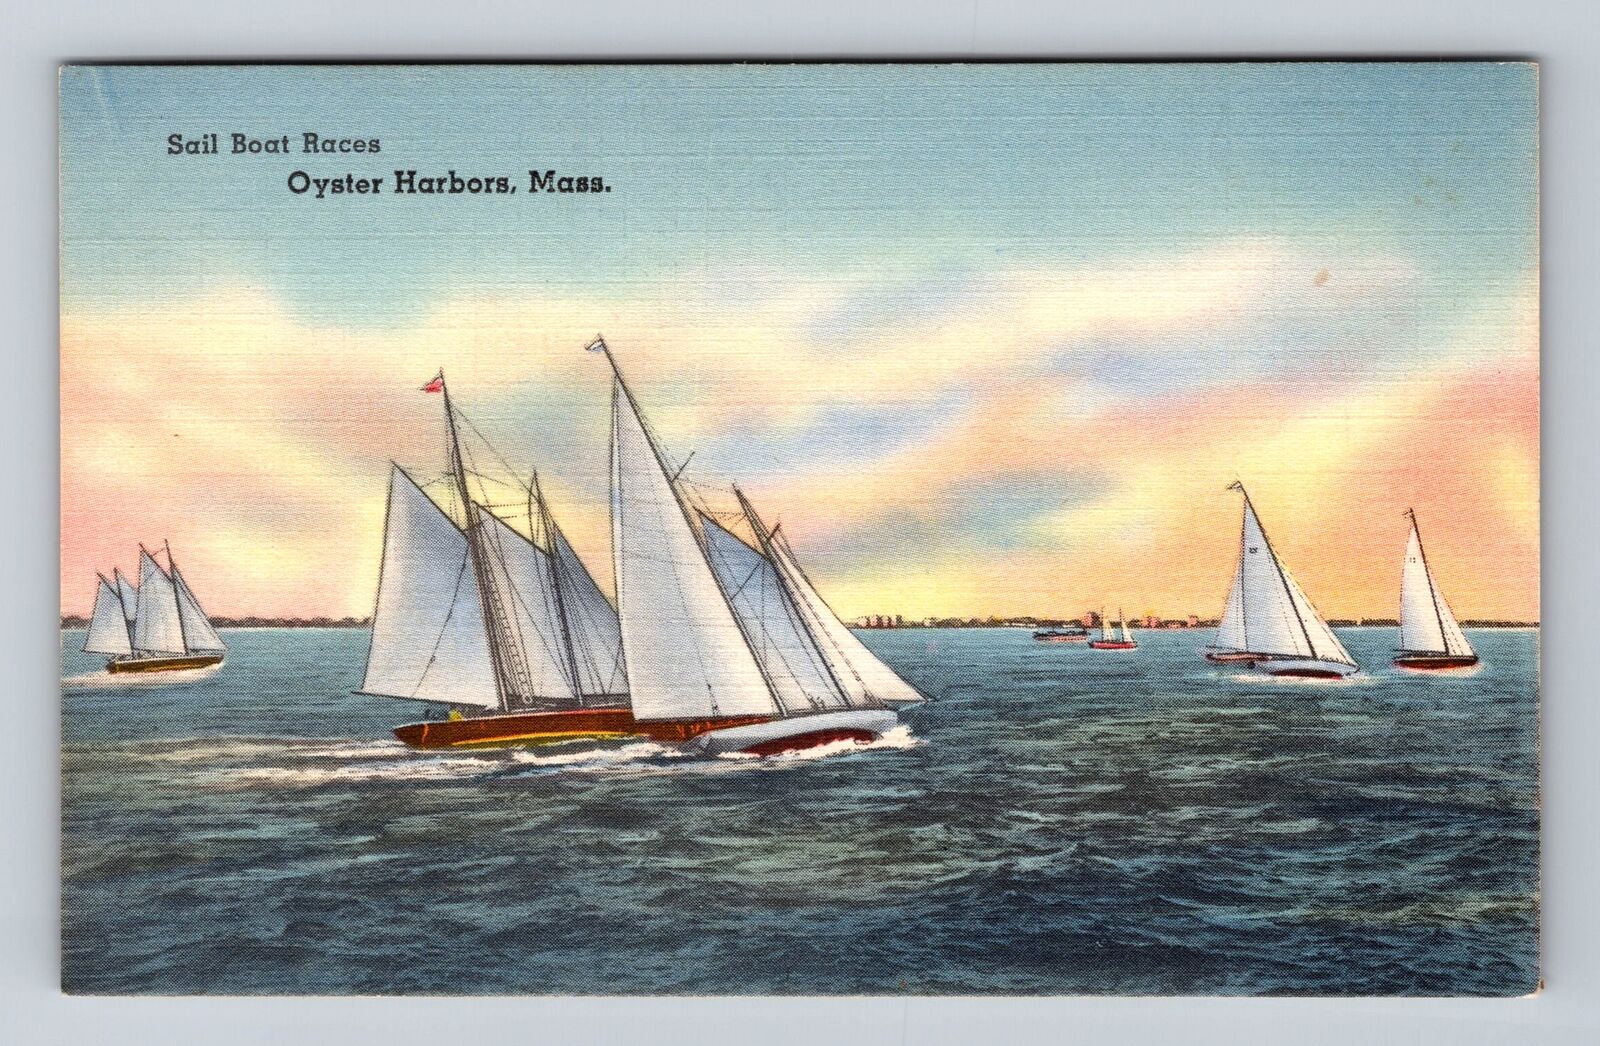 Oyster Harbors MA-Massachusetts, Scenic View, Sail Boat Races Vintage Postcard